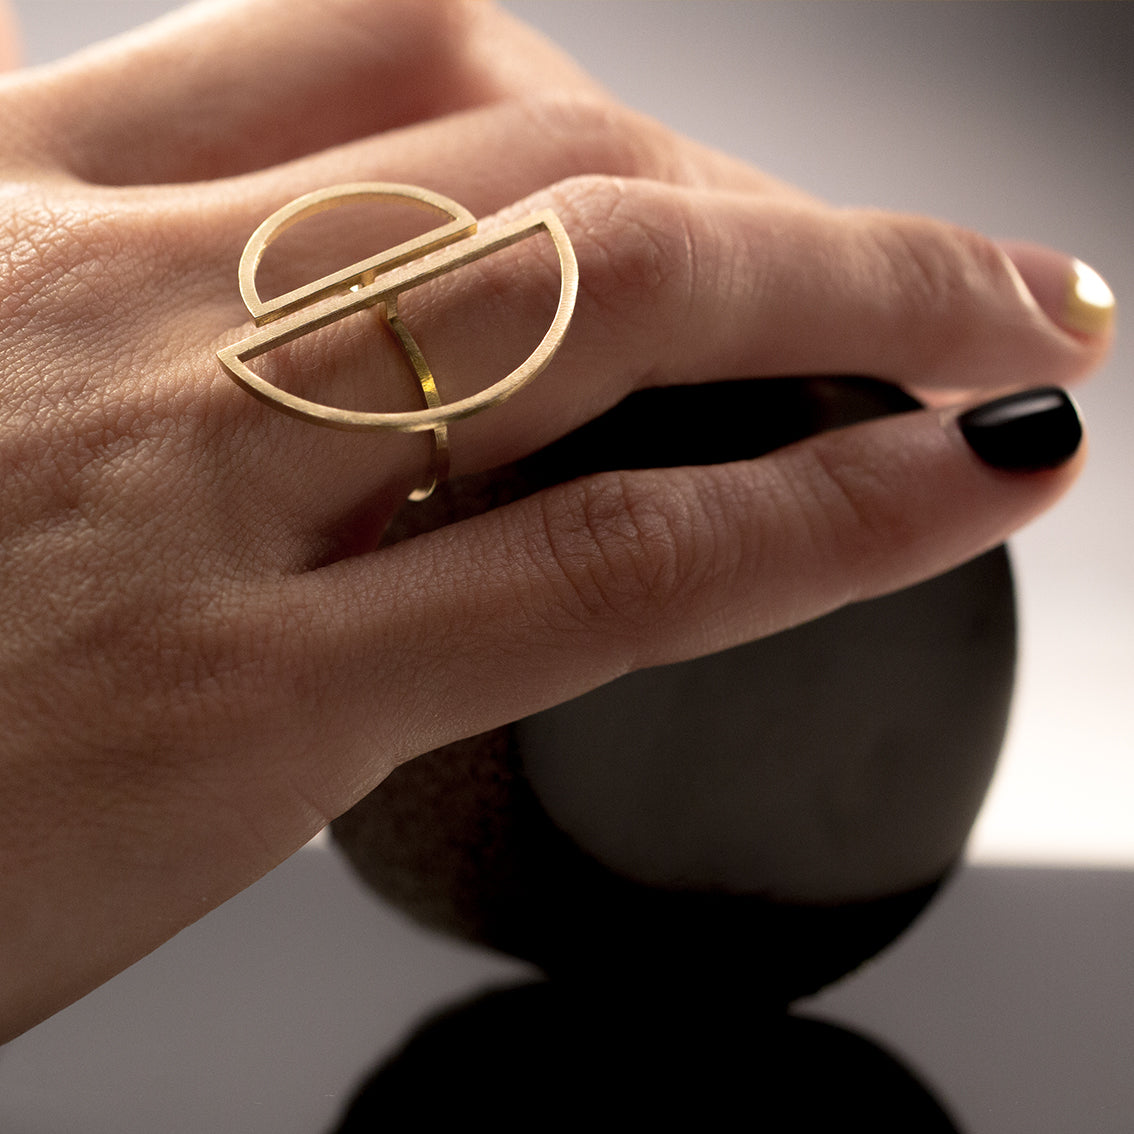 A right hand of a female person with trendy, interesting,  nail polish in black and light yellow, is lightly laying on a round black object ready to be rolled. The person is wearing a feature brass ring which glows lightly revealing it's minimal silhouette. The ring has a very thin band and is open on top to connect with two half circles which are also made of a very thin cross section. The two half circles are  hovering on the adjacent fingers.